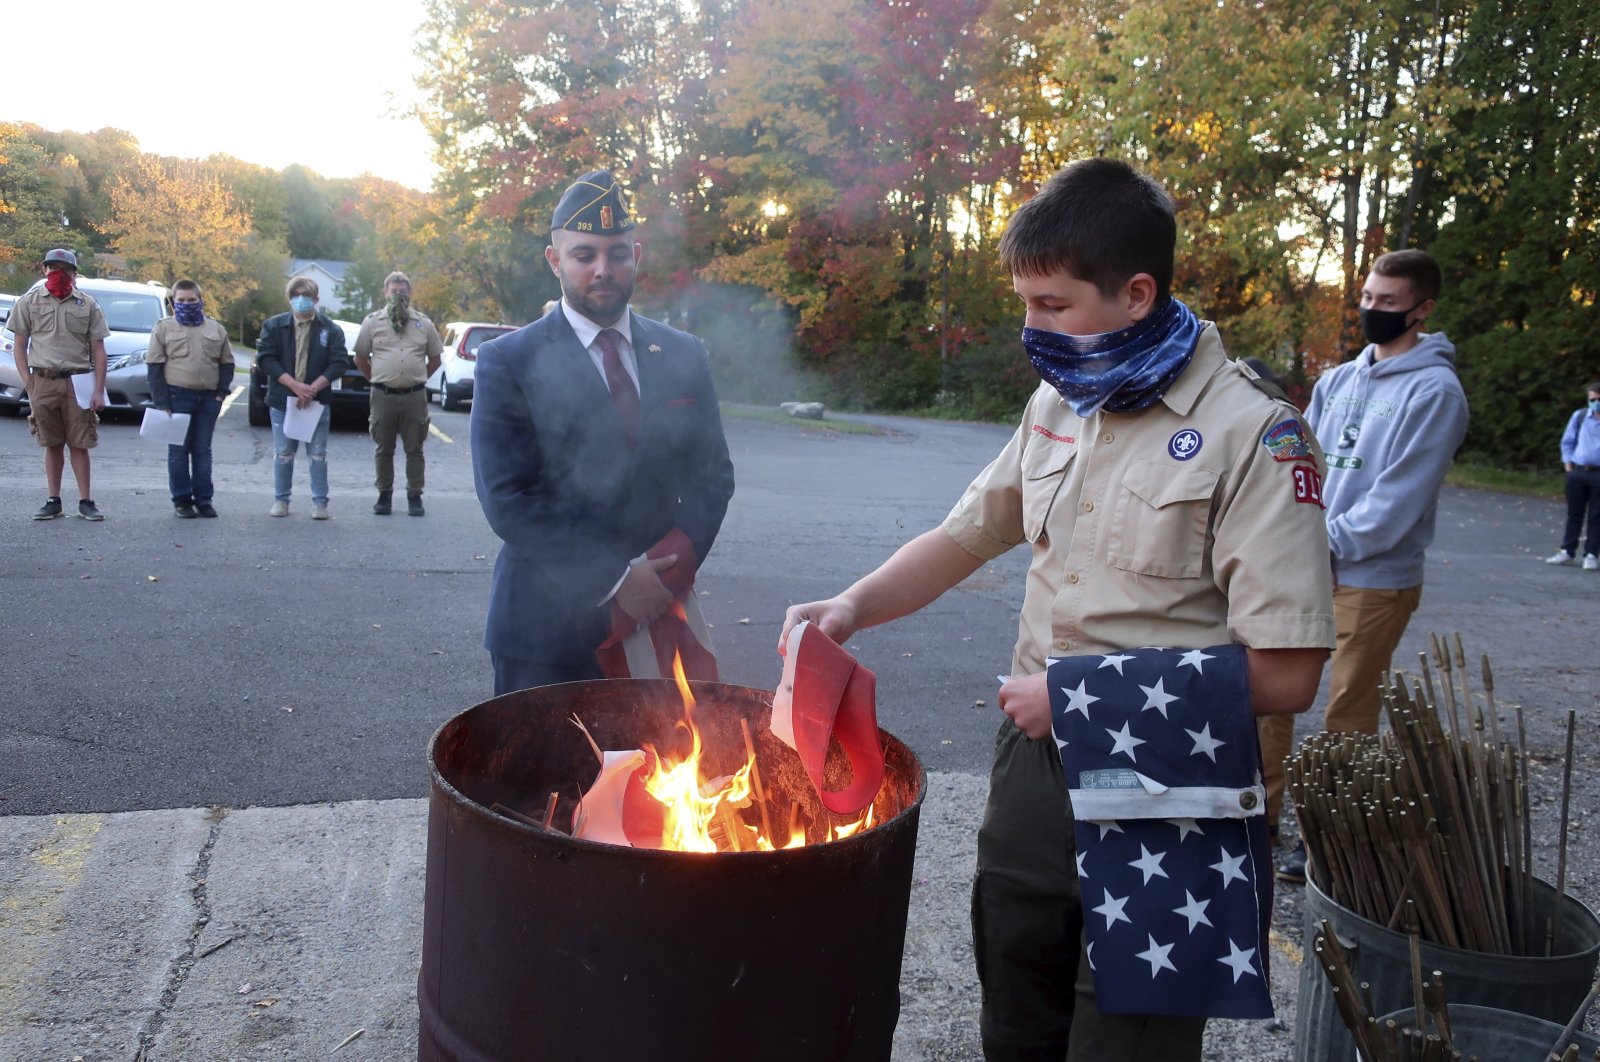 In this Oct.13, 2020 file photo, Jondavid Longo (C), the Republican mayor of Slippery Rock, Pa., presides over a Boy Scouts flag retirement ceremony where worn-out flags are cut up and burned in Slippery Rock. (AP Photo)